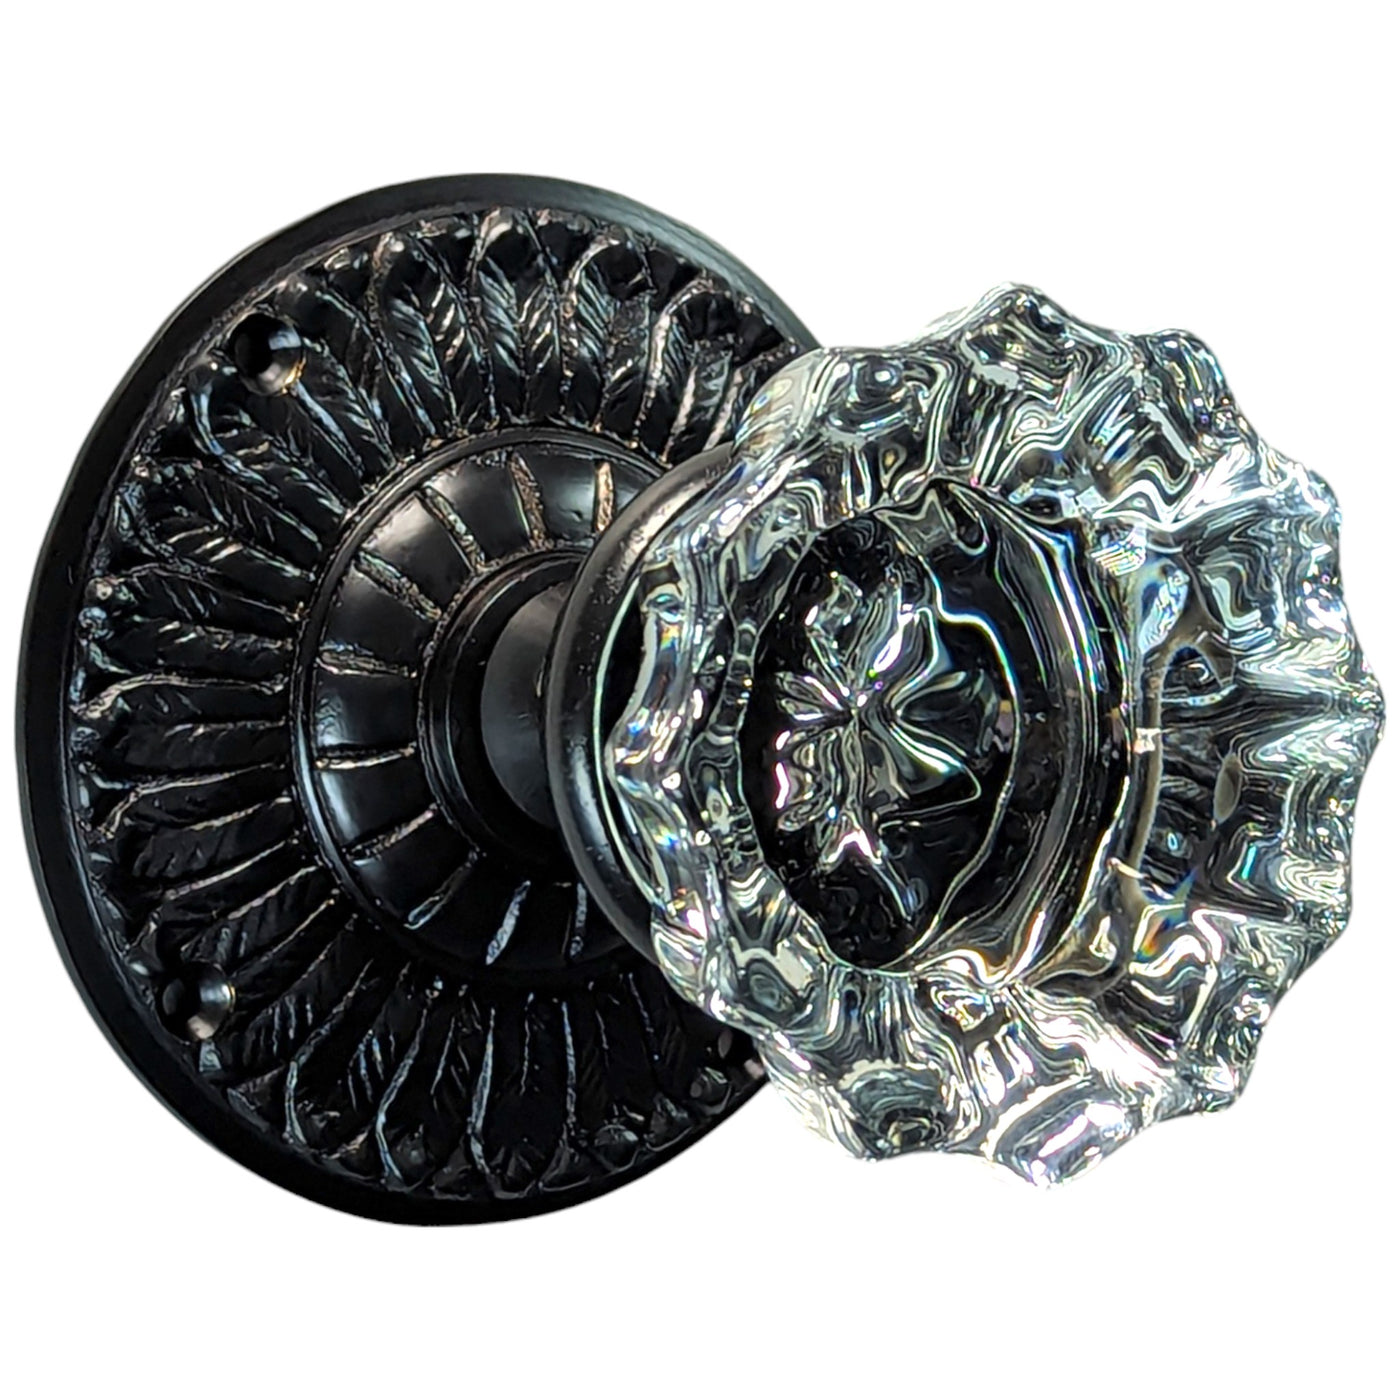 Feather Rosette Door Set with Fluted Crystal Door Knobs (Several Finishes Available)